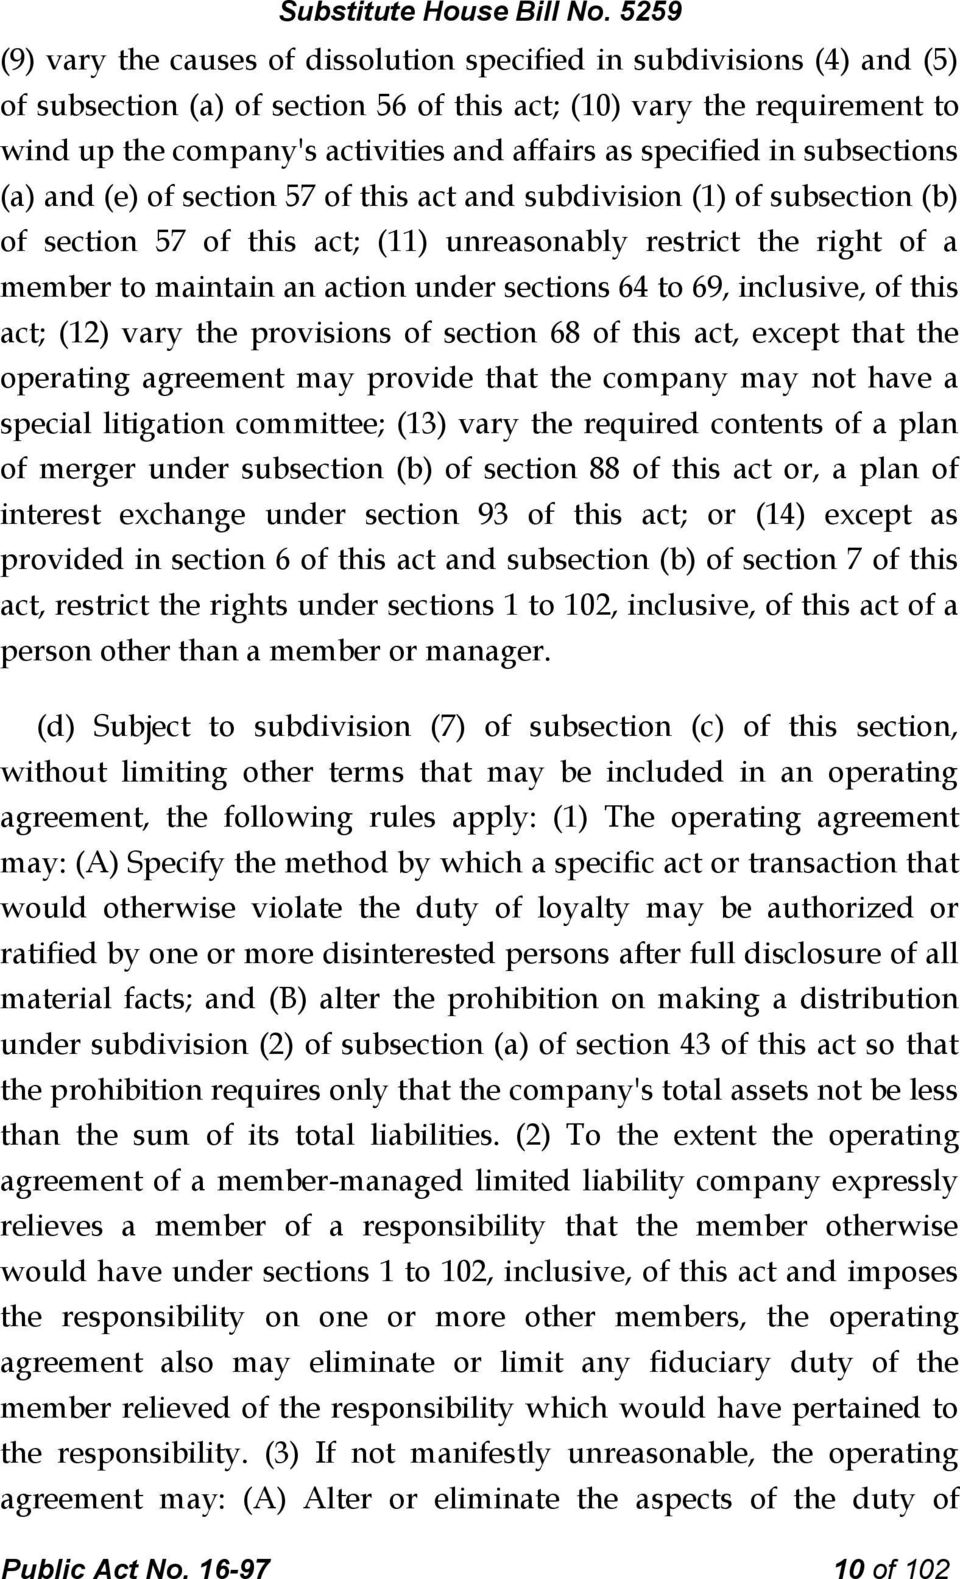 under sections 64 to 69, inclusive, of this act; (12) vary the provisions of section 68 of this act, except that the operating agreement may provide that the company may not have a special litigation